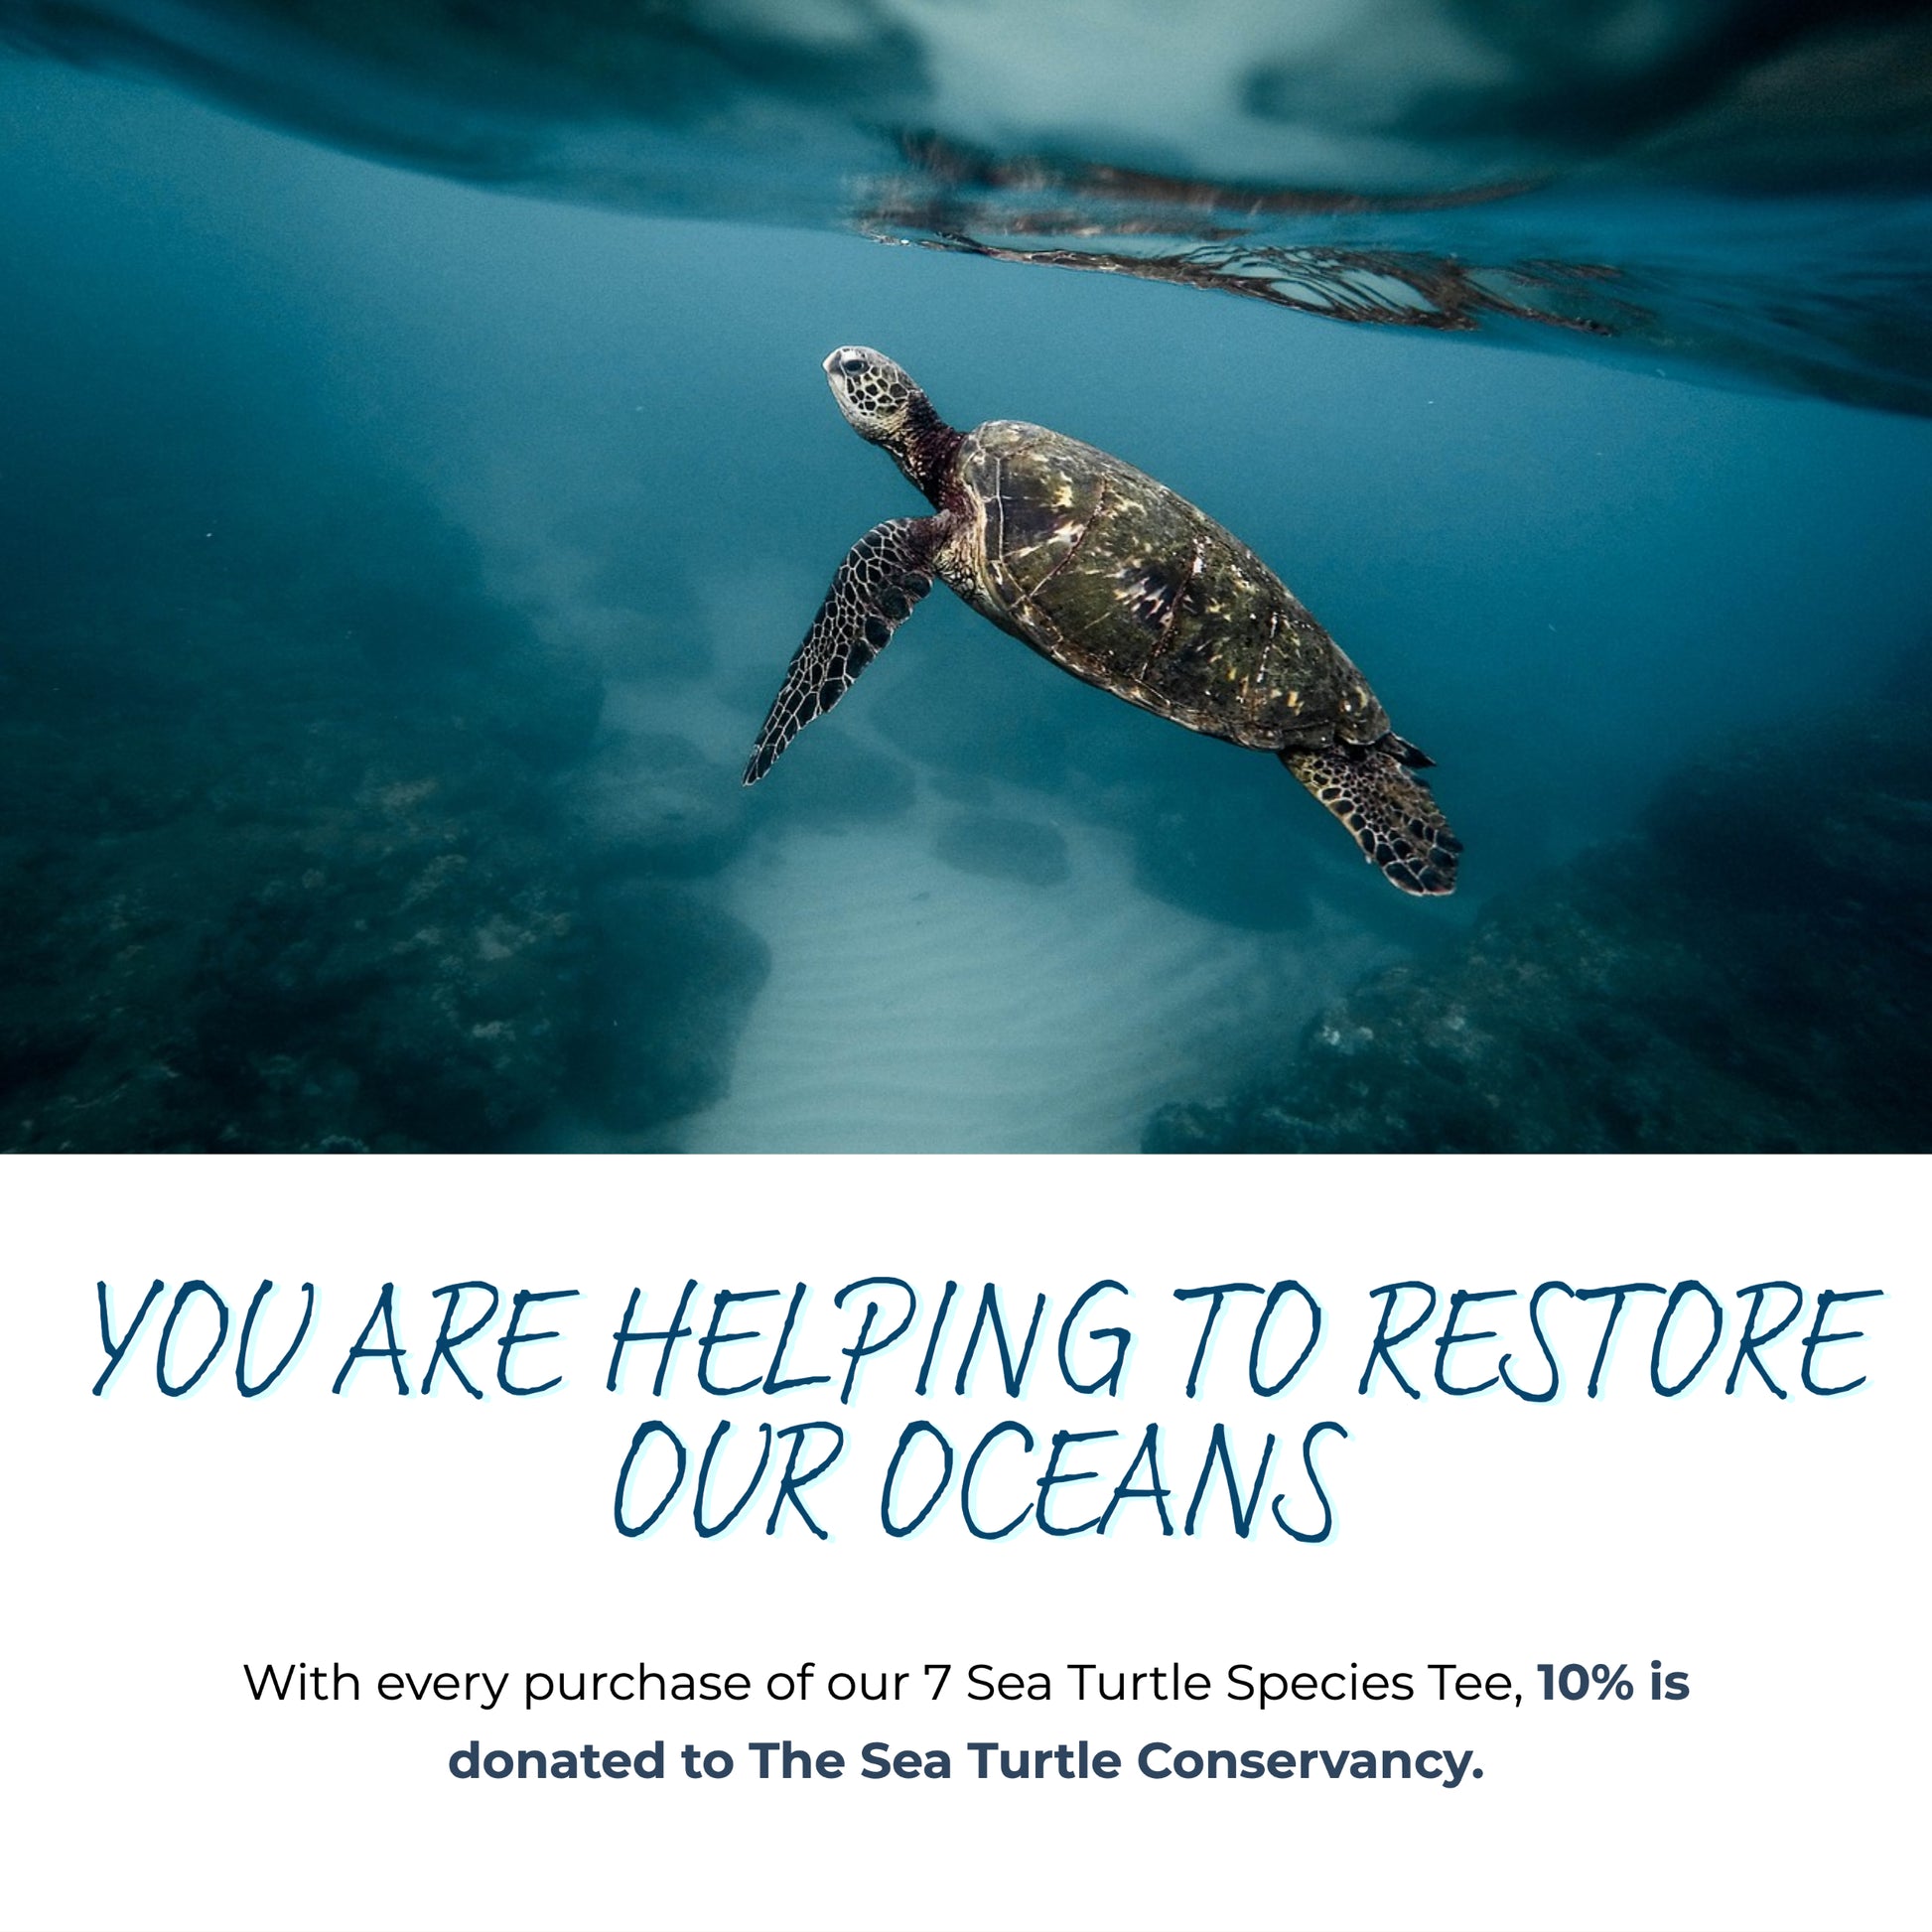 7 sea turtle species tee - connected clothing company - 10% donated to sea turtle conservation